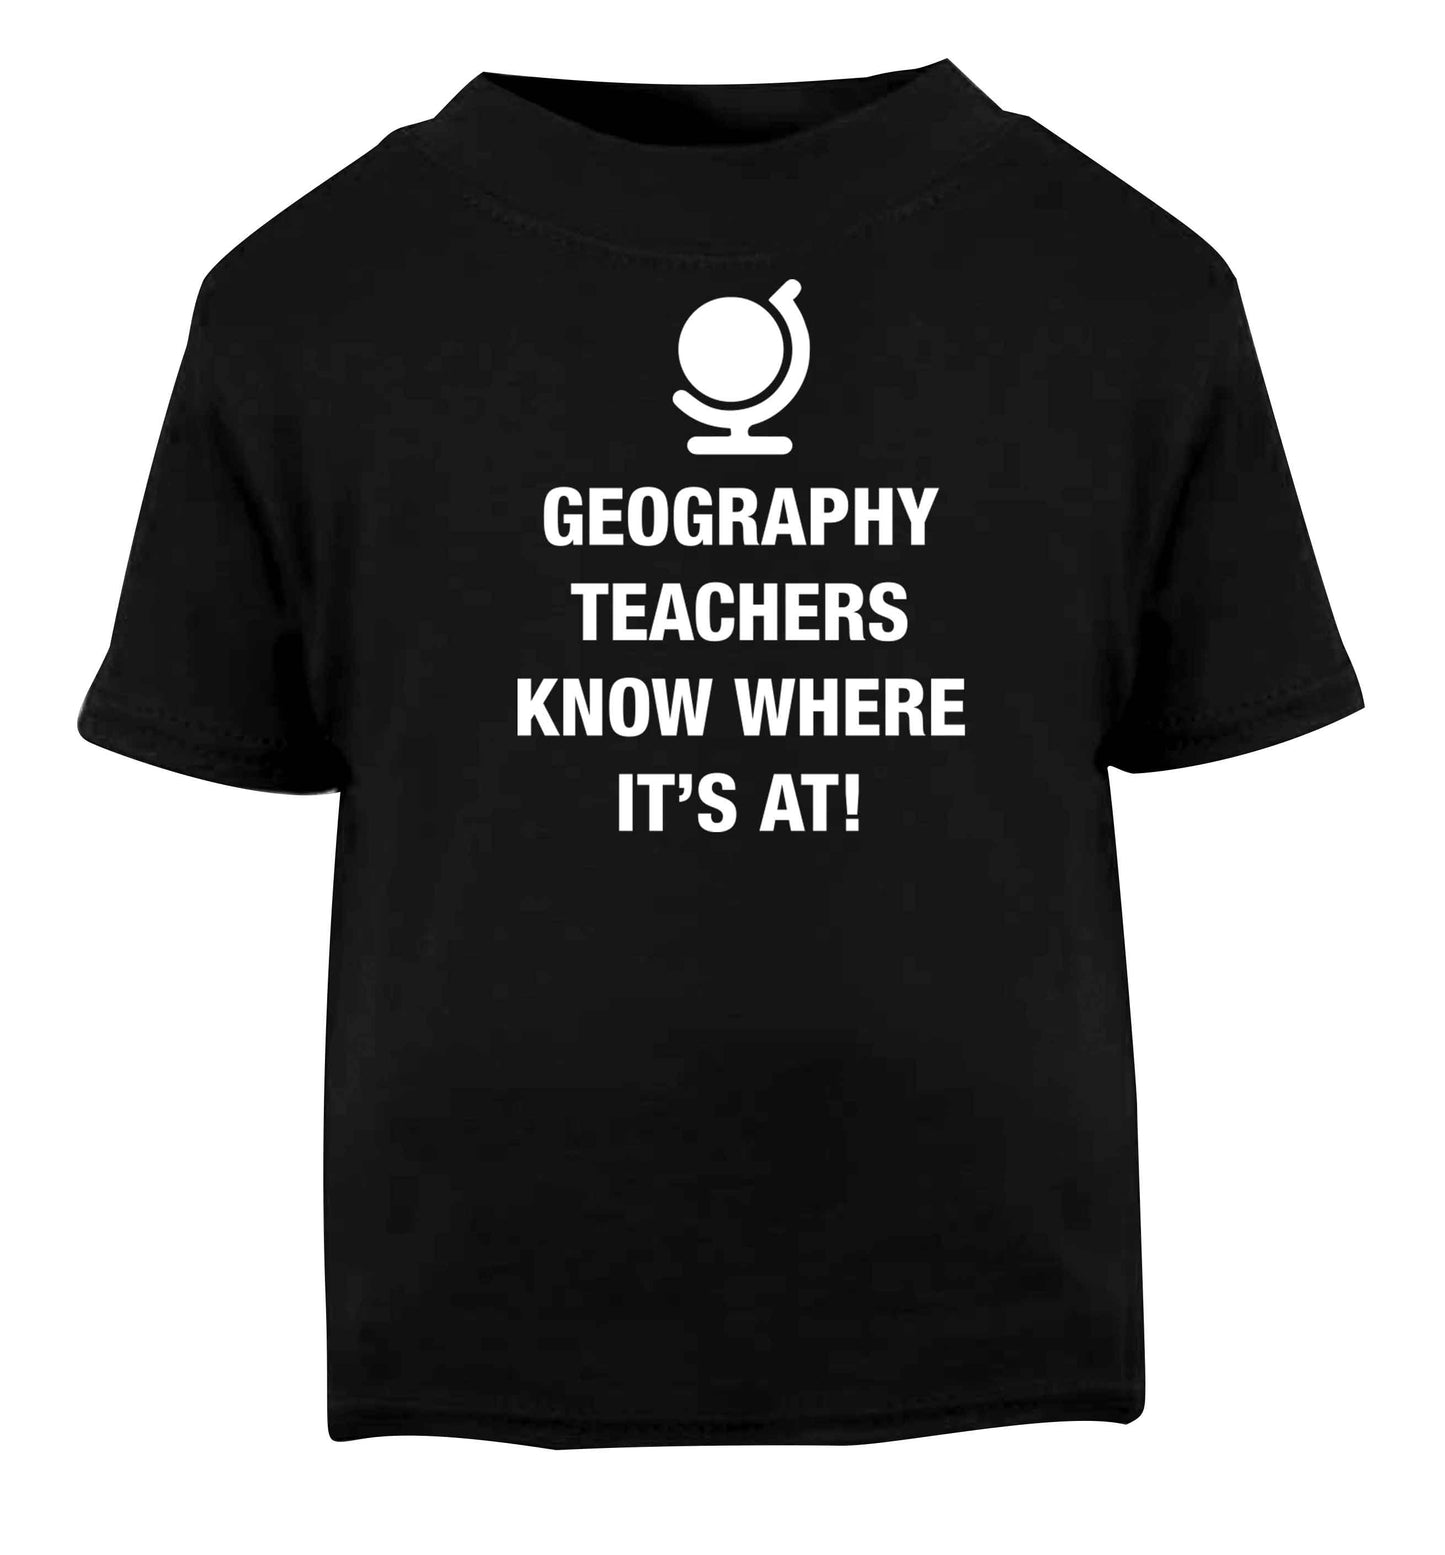 Geography teachers know where it's at Black baby toddler Tshirt 2 years